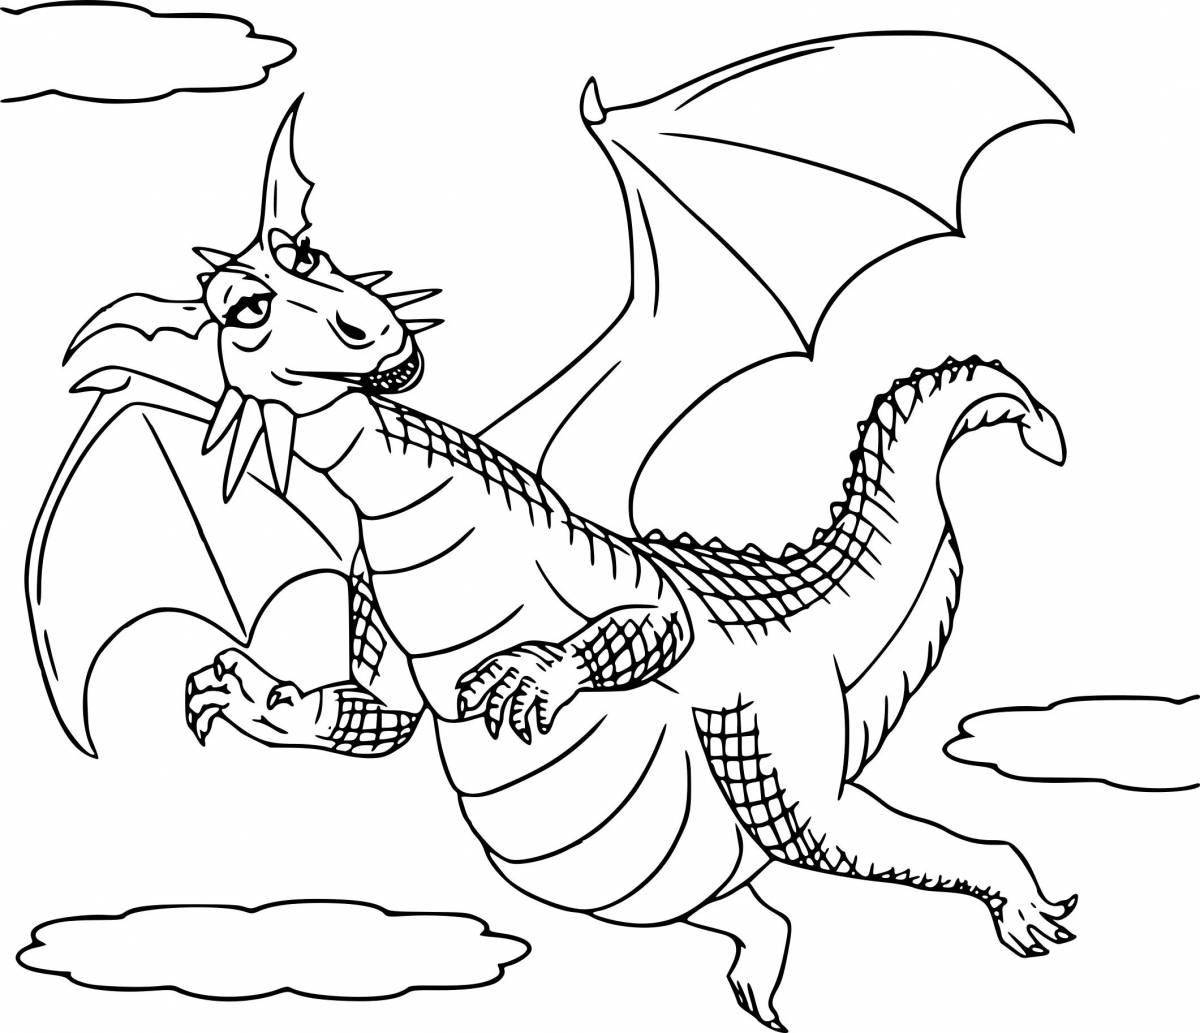 Incredible dragon coloring pages for 6-7 year olds